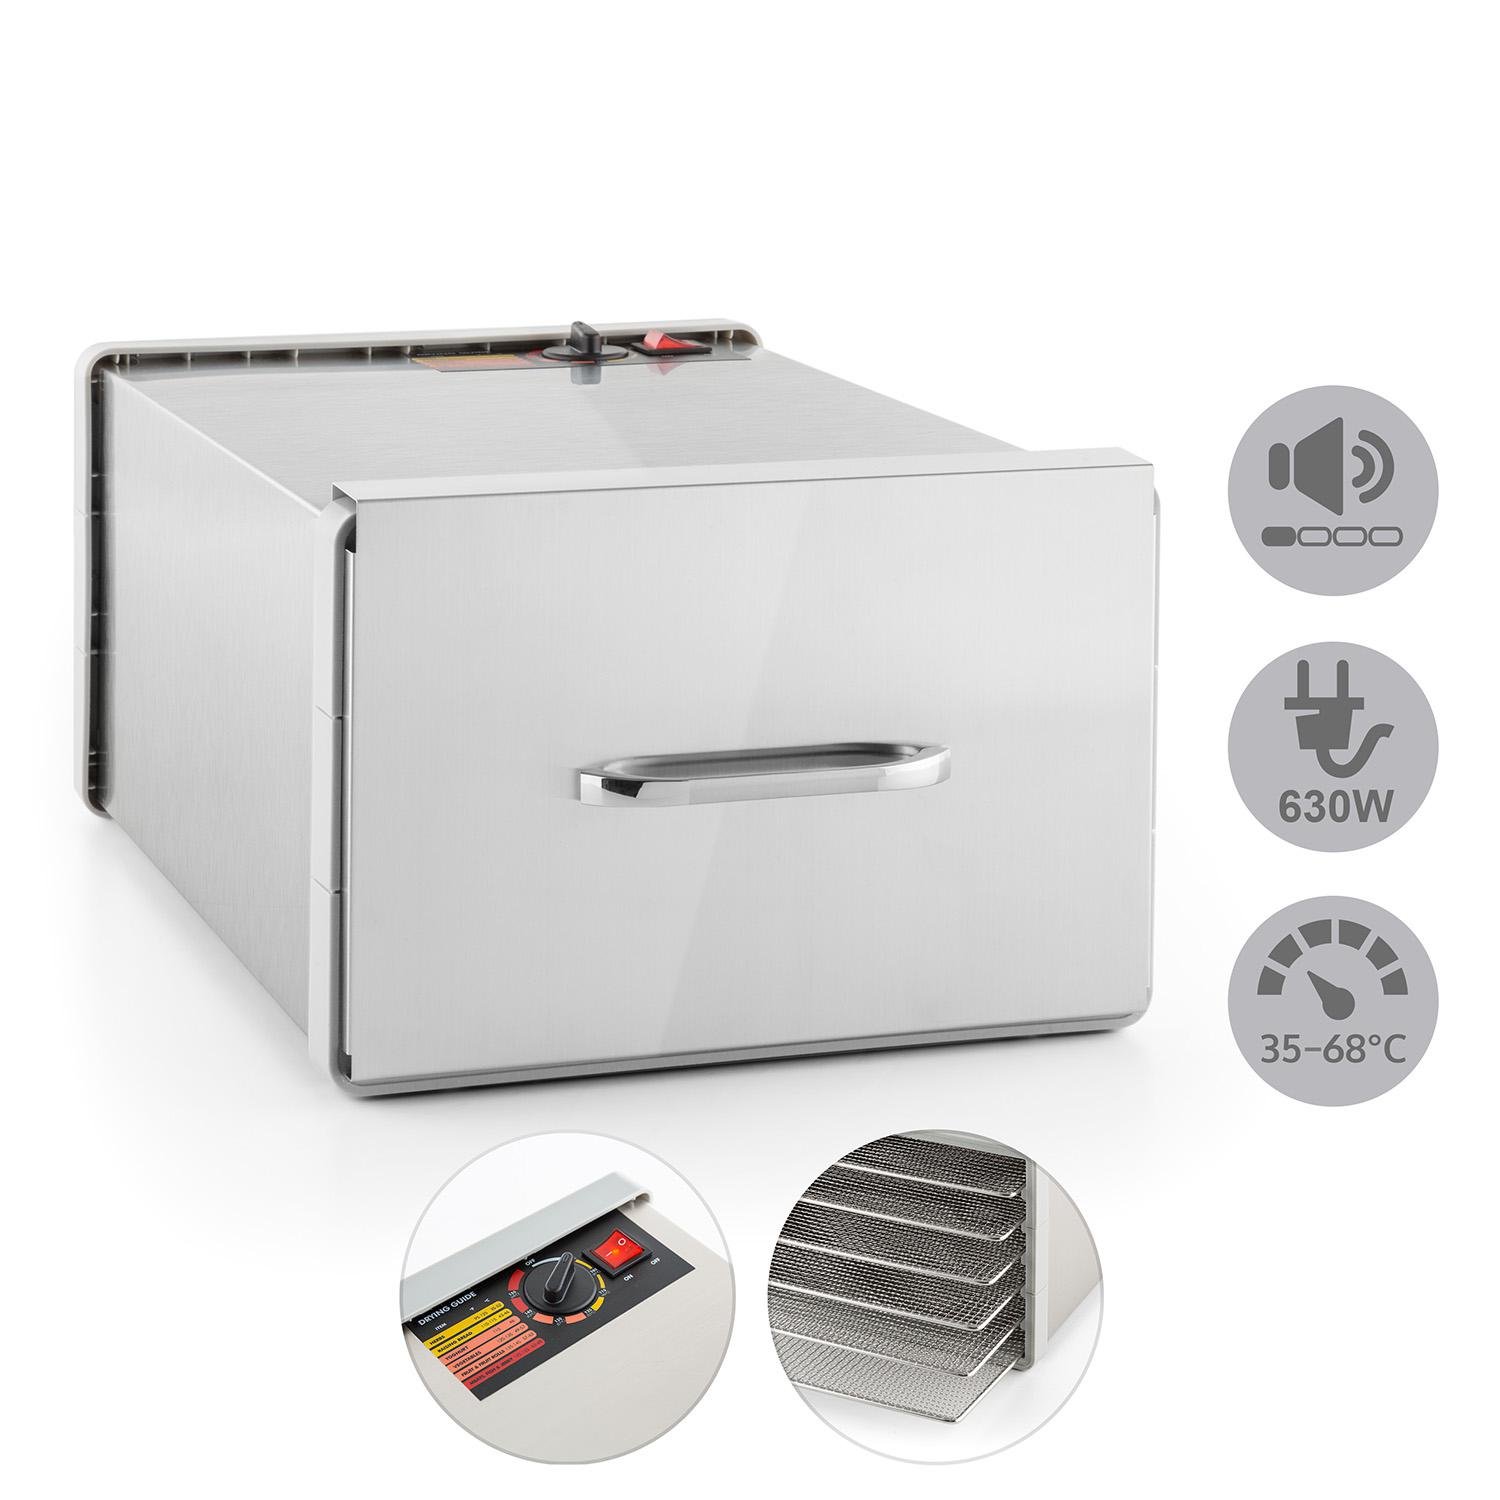 Food Dehydrator 220V Home Stainless Steel 6 Trays